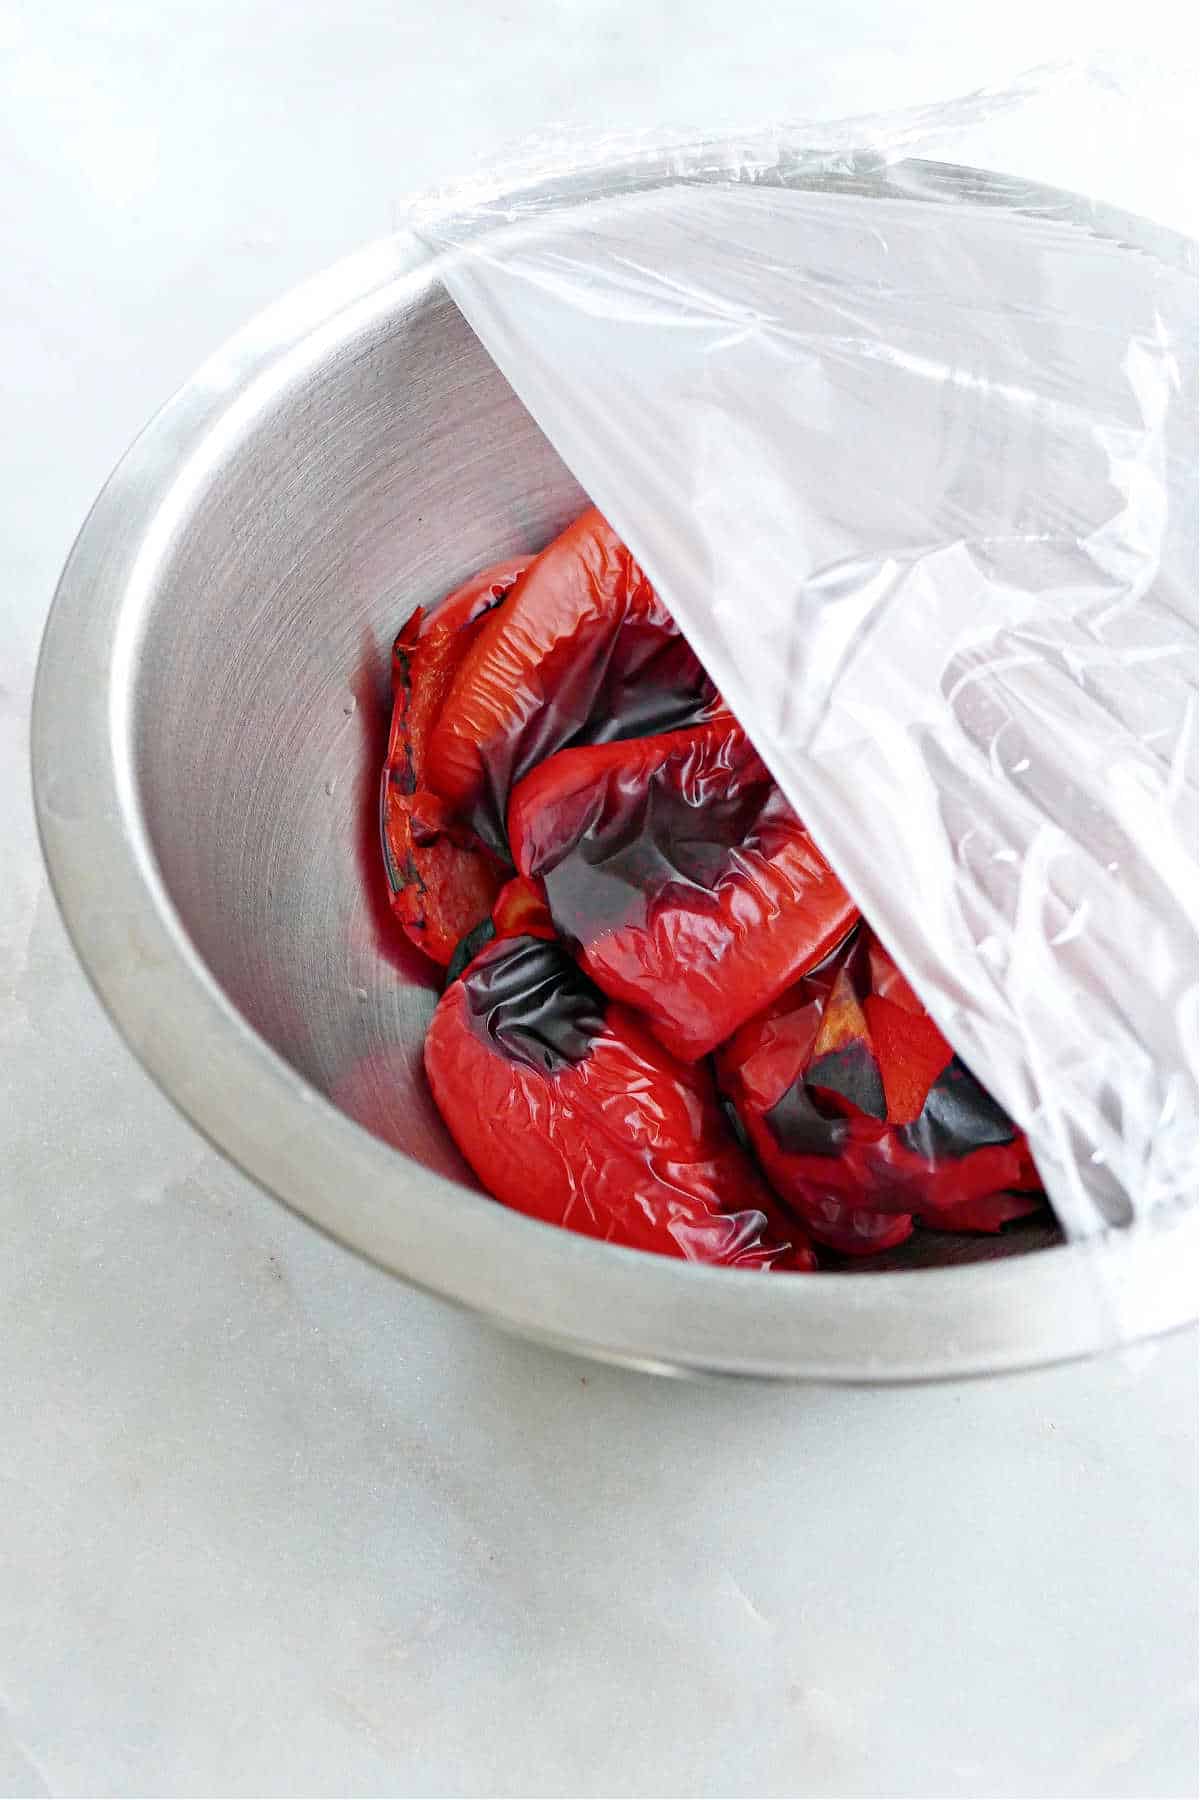 roasted red peppers in a large bowl halfway covered with plastic wrap